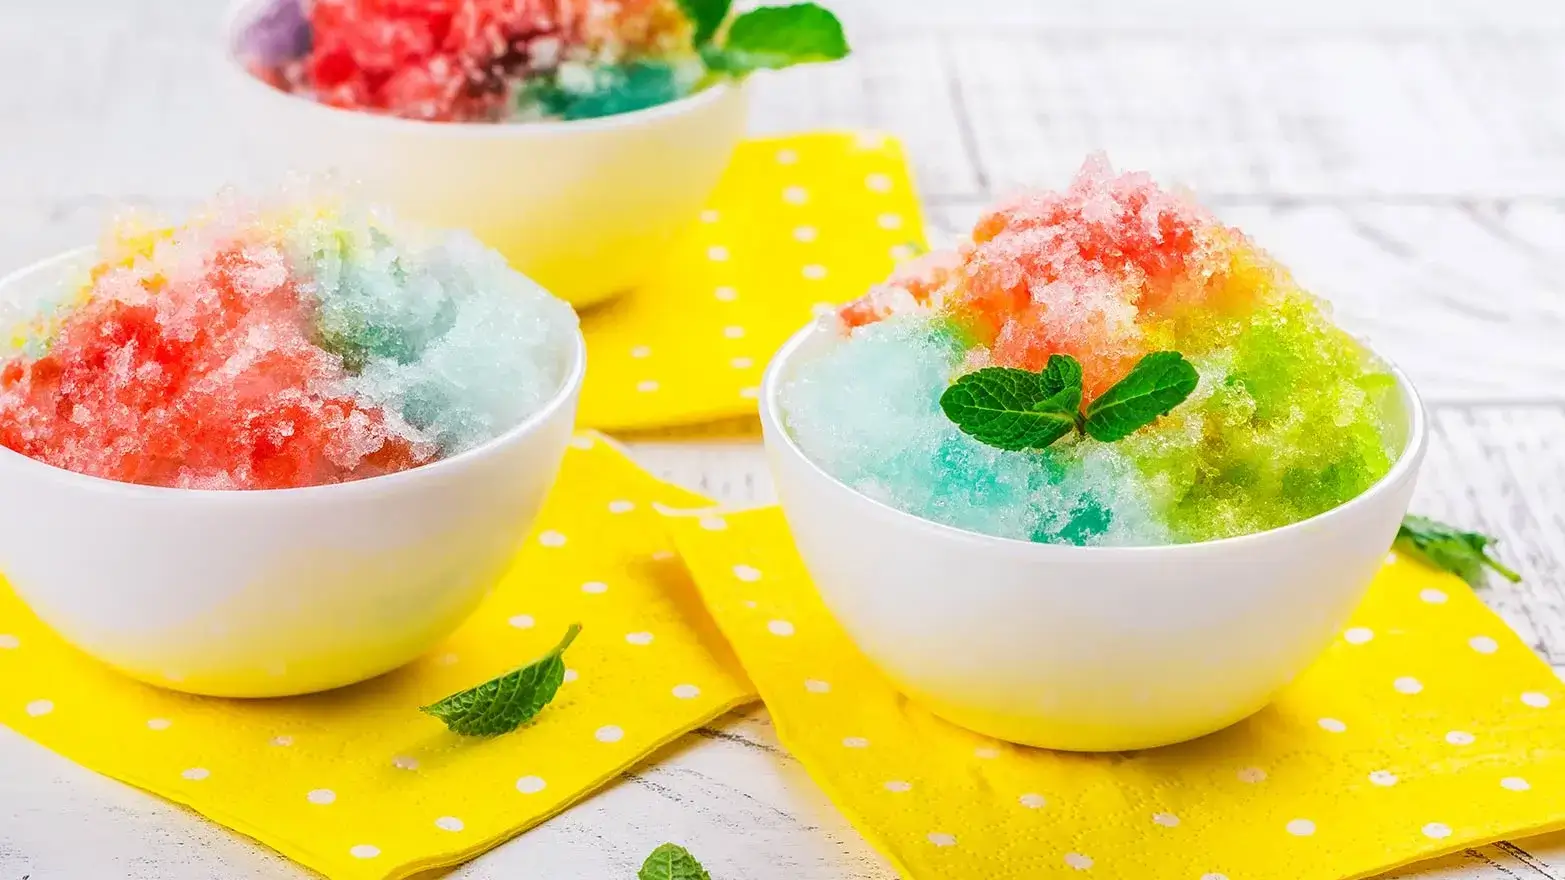 Rainbow shaved ice in a white bowl, which makes for a good ice cream alternative